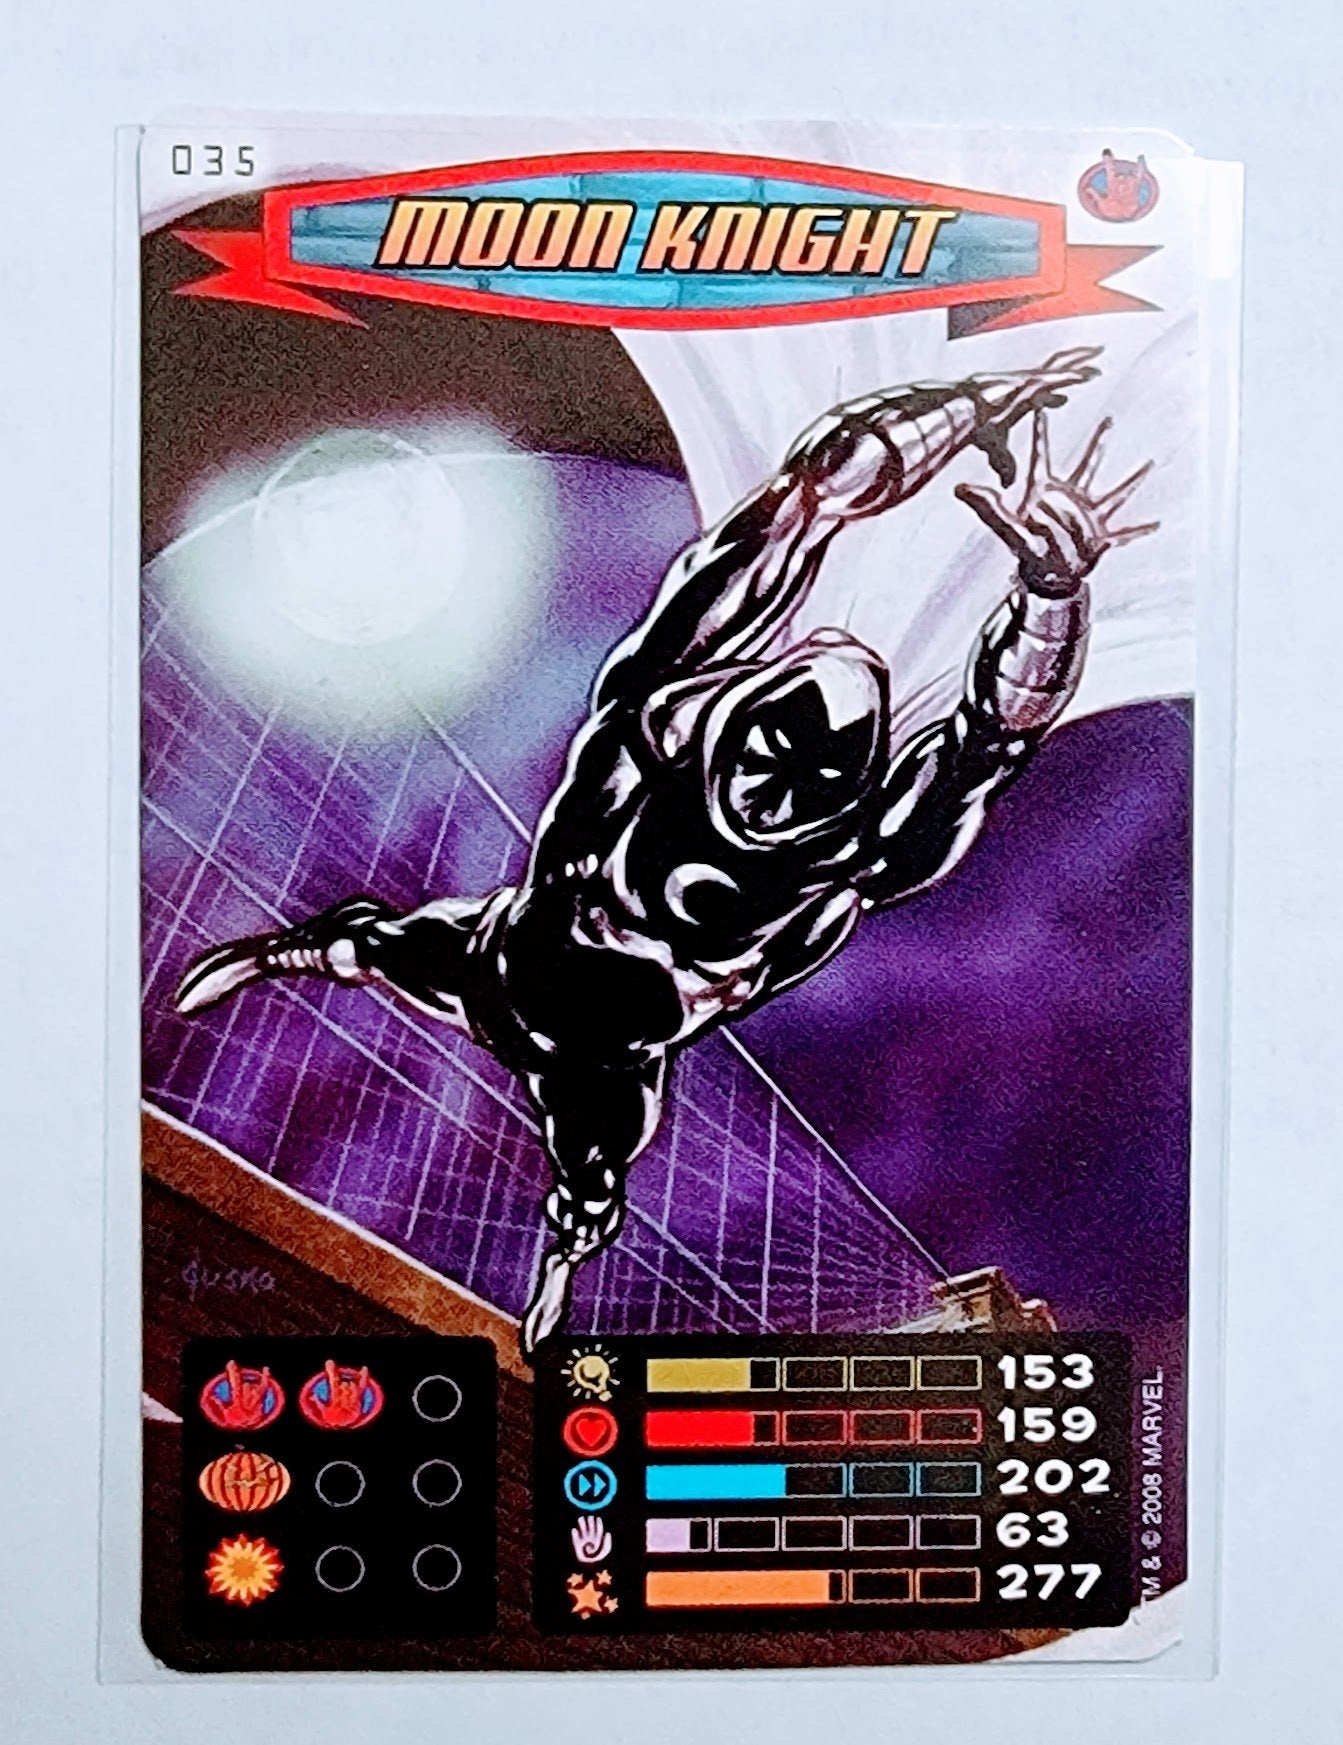 2008 Spiderman Heroes and Villains Moon Knight #35 Marvel Booster Trading Card UPTI simple Xclusive Collectibles   